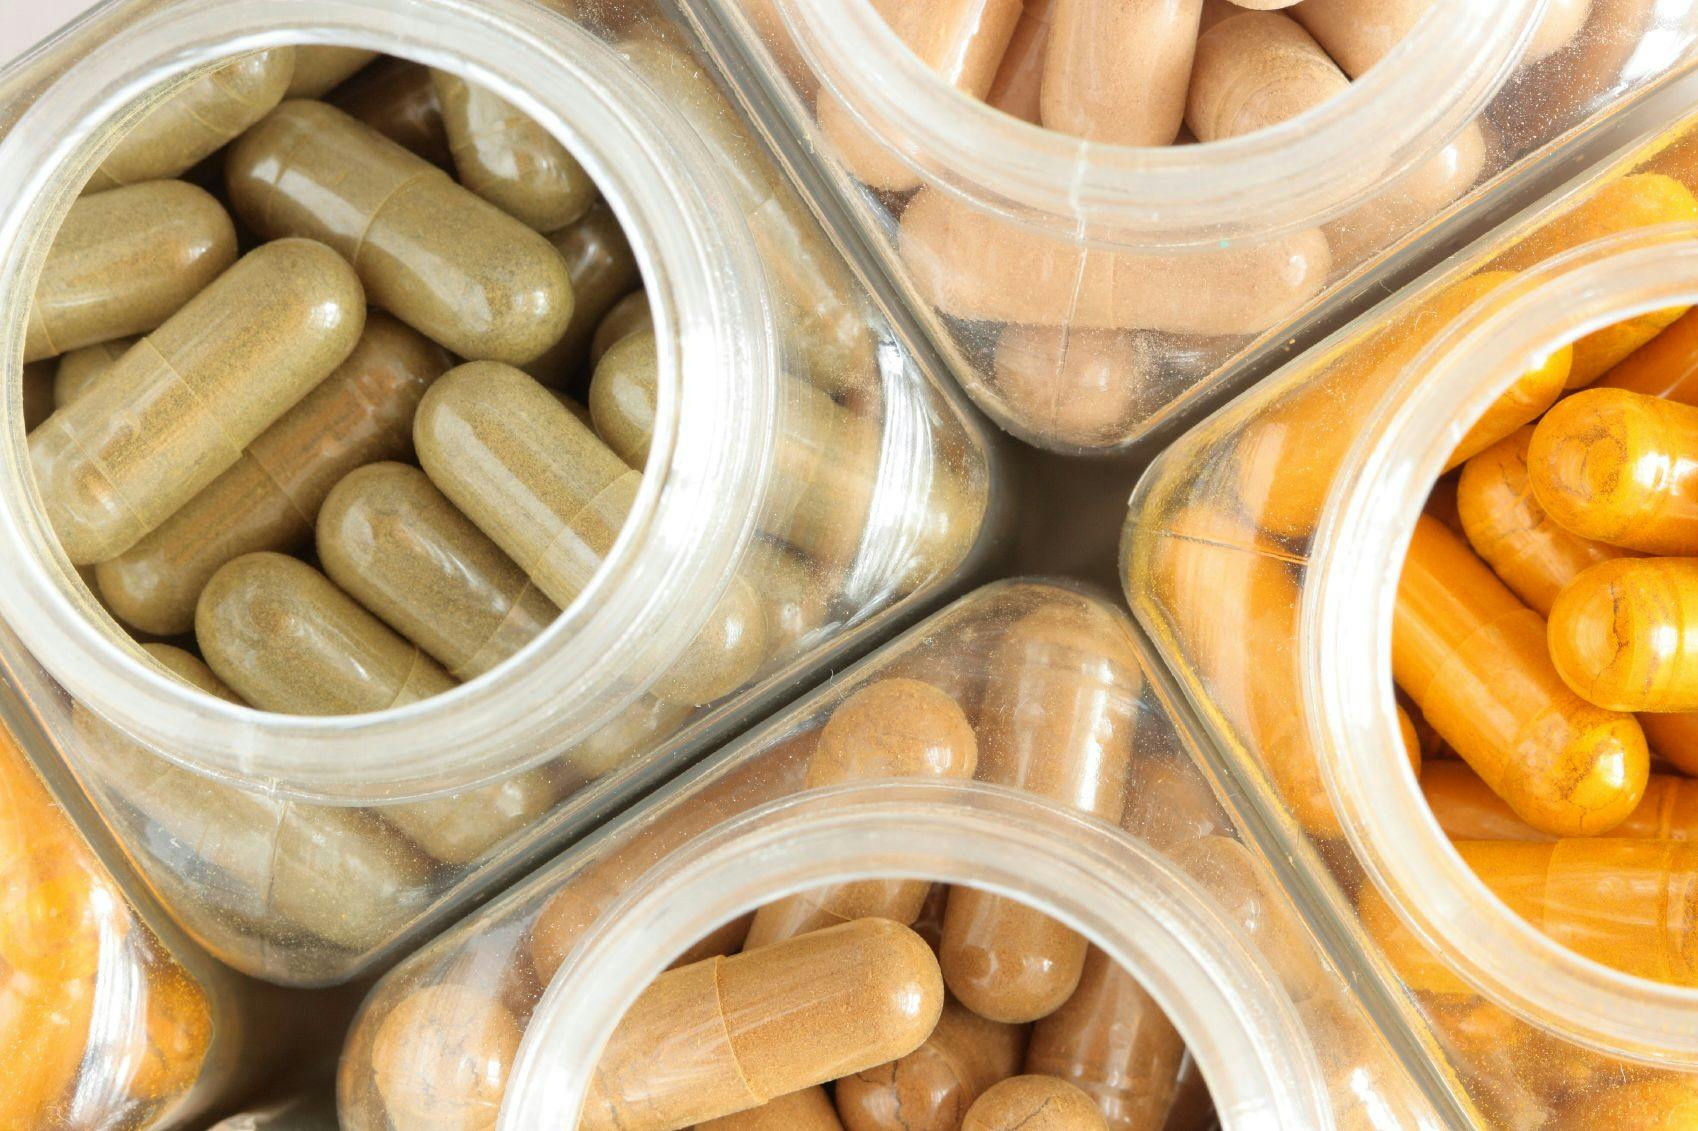 Study Raises Concern over Dietary Supplements and Mortality Risk